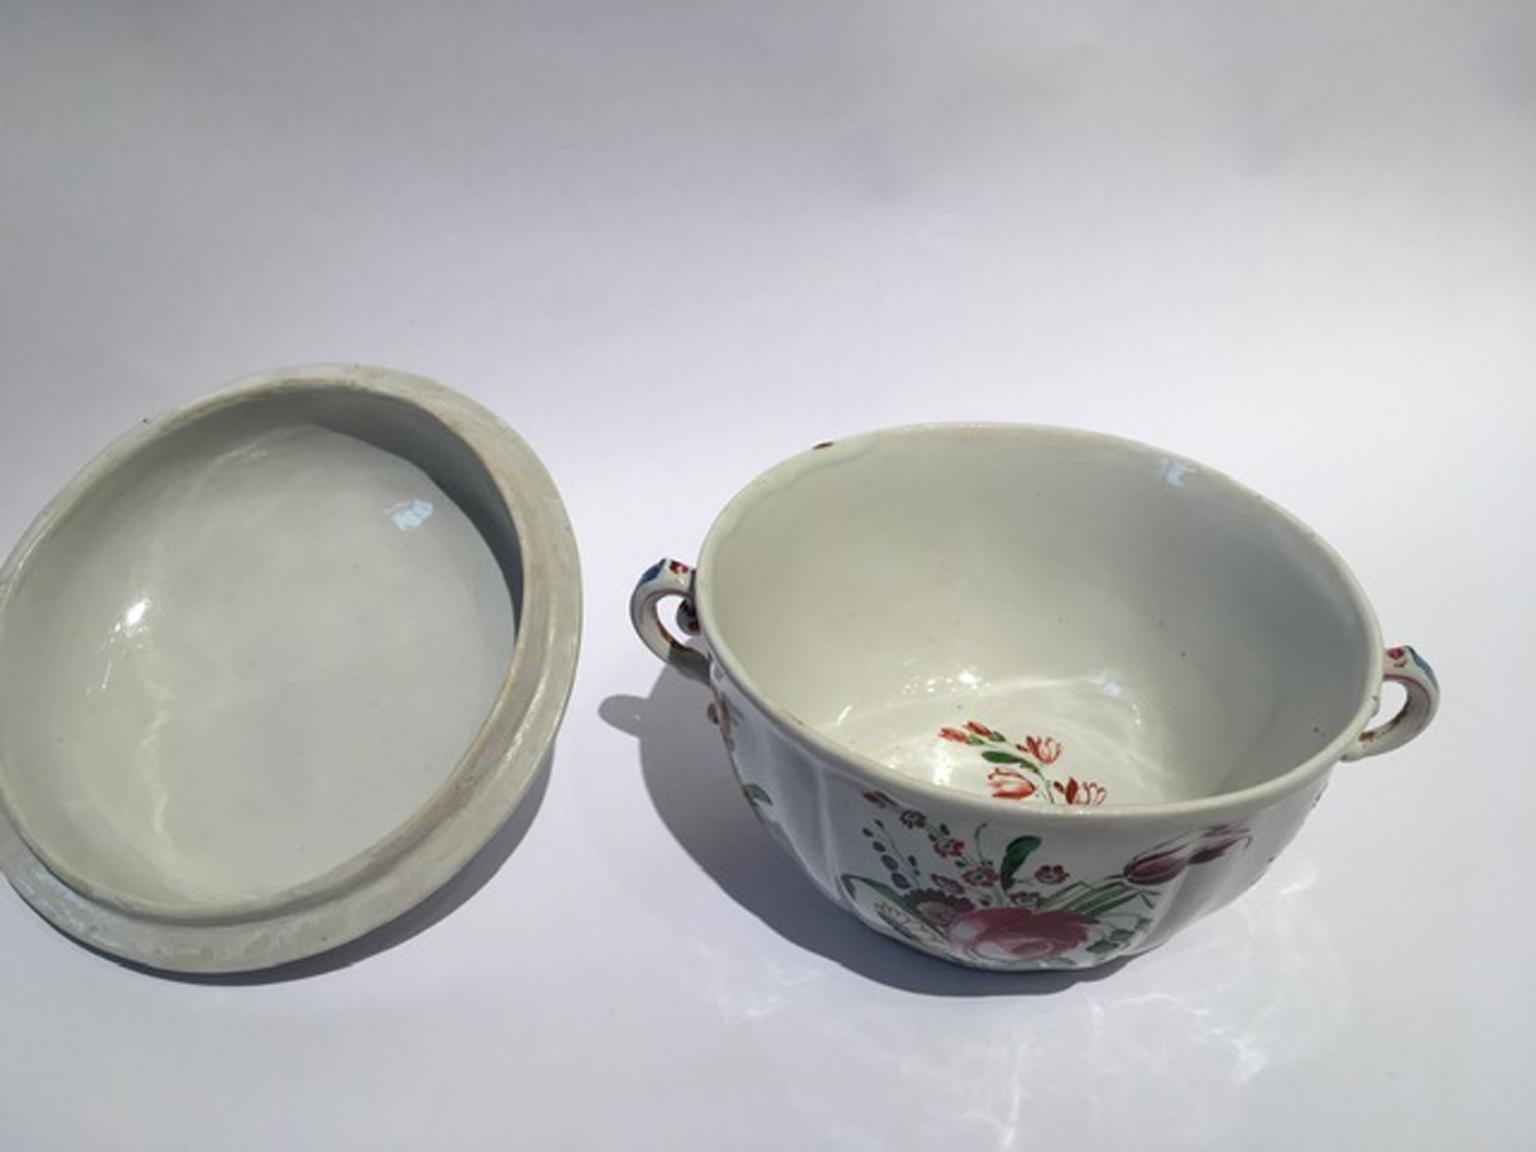 Italy 18th Century Richard Ginori Porcelain Sugar Bowl with Floral Drawings 1